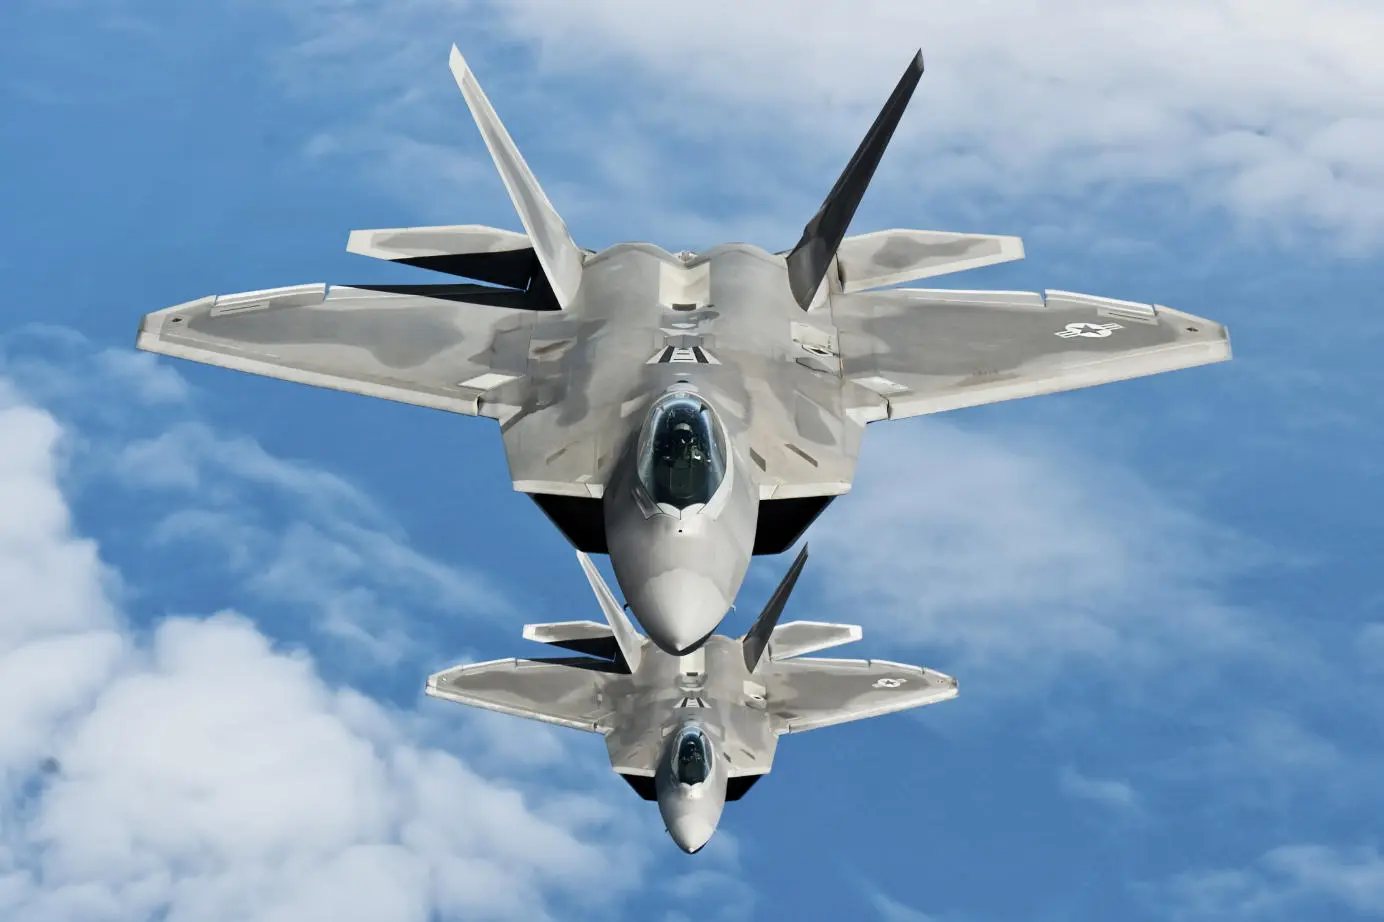 The F-22 Raptor is capable of flying supersonic